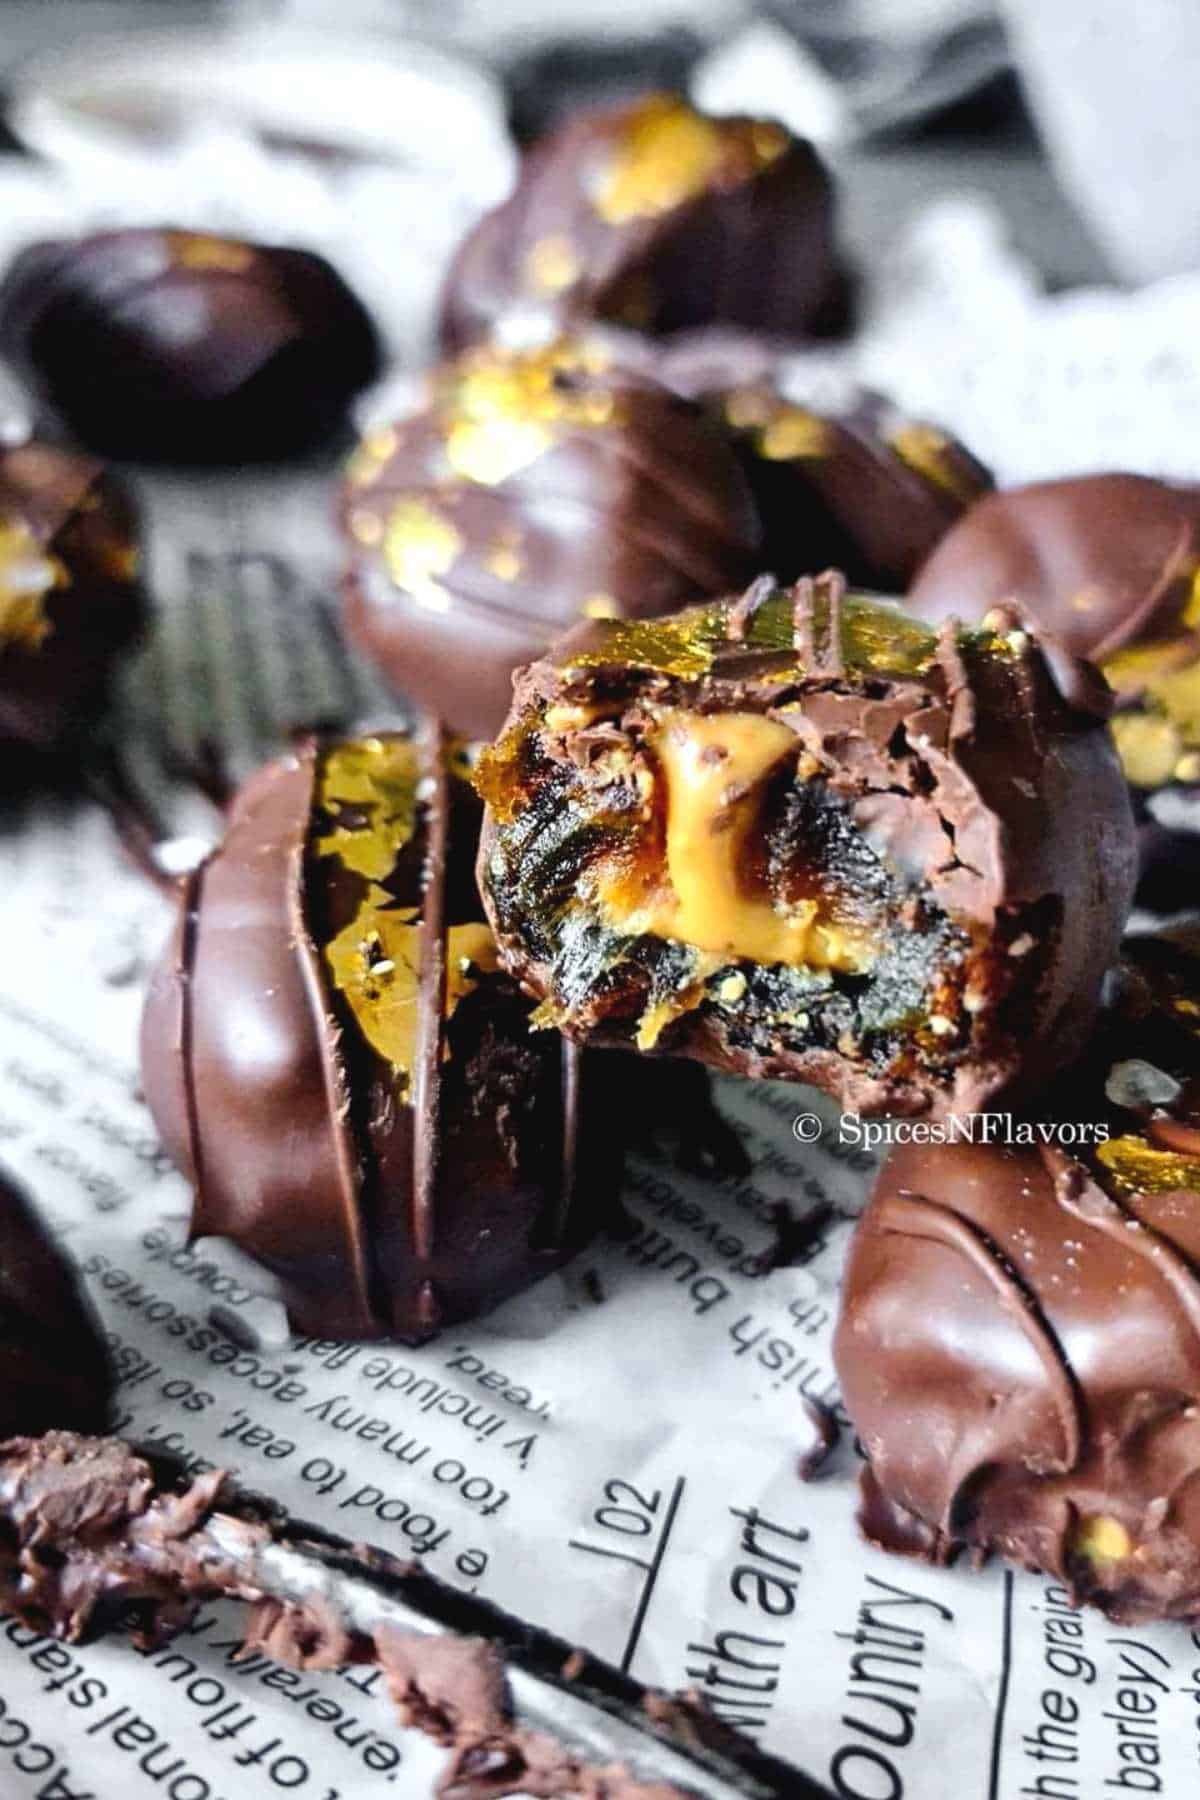 stuffed dates sliced in the middle to show the peanut butter oozing from inside